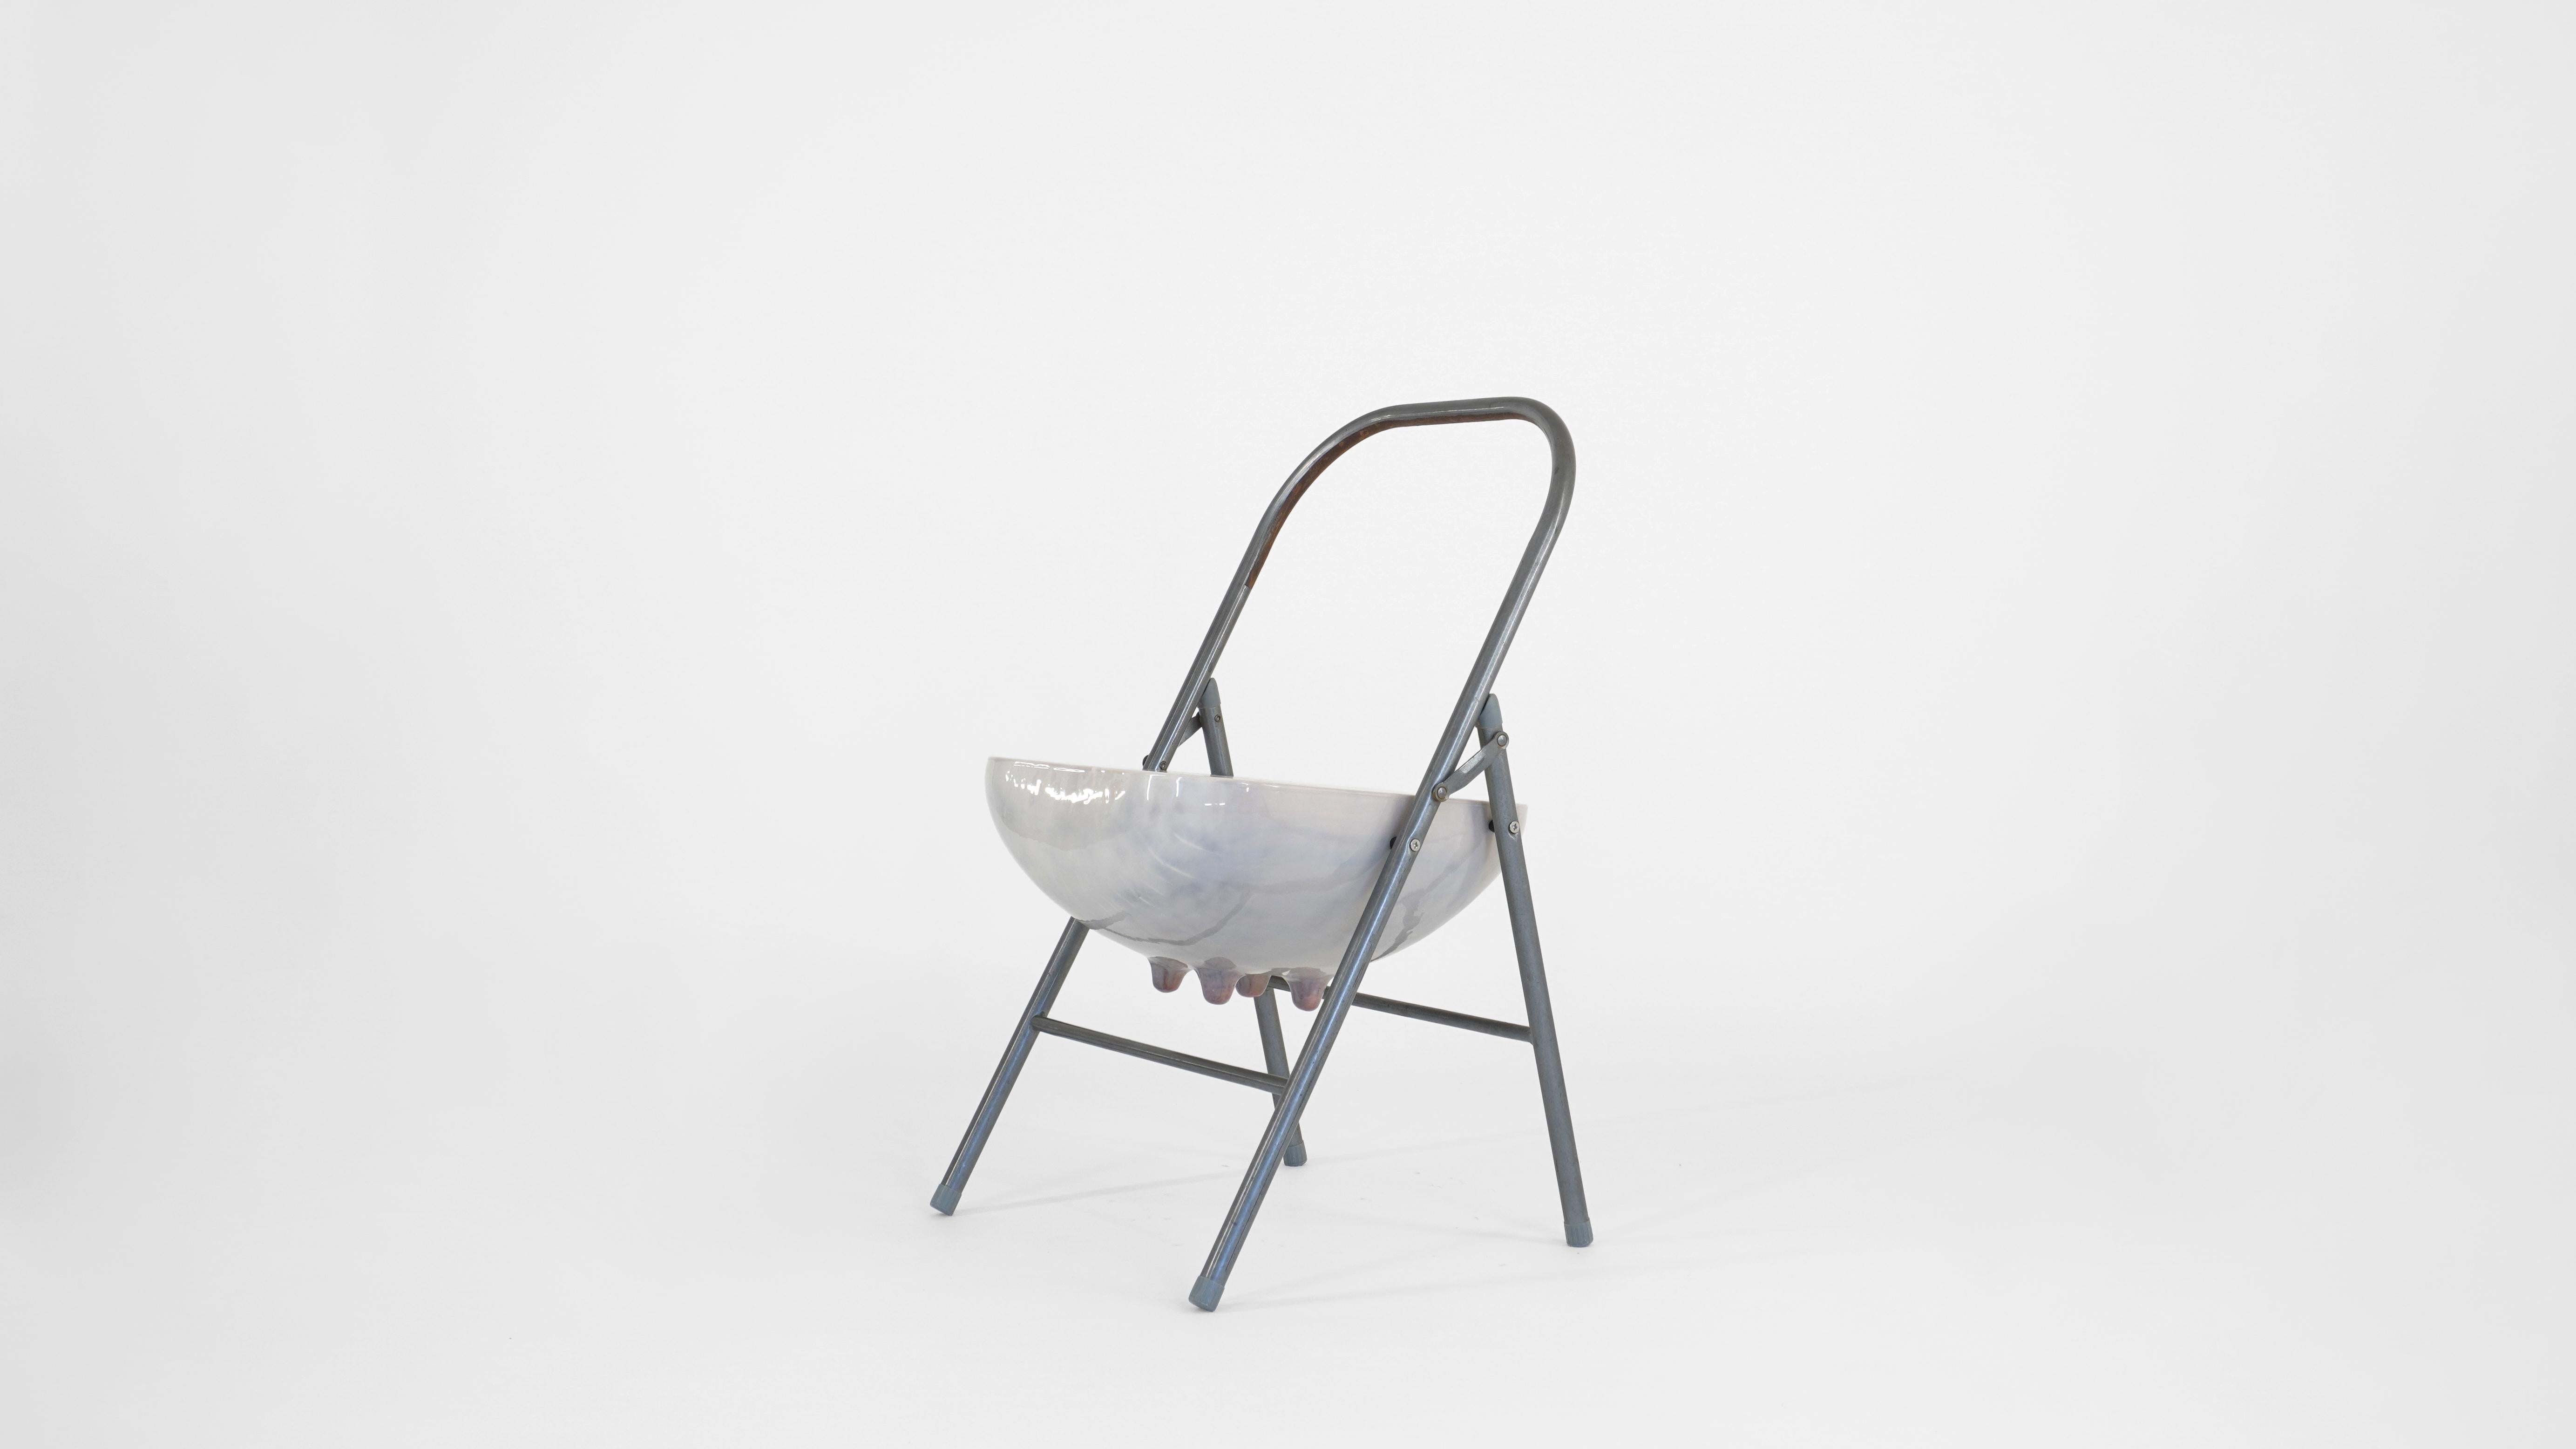 Folding Udder Chair by Henry D'ath
Dimensions: D 45 x W 45 x H 77.5 cm
Materials: Wood, Steel. 
Available finishes: White/Red Gloss. 


Henry d’ath is a New Zealand-born, Hong Kong-based artist and architect. 
Using predominantly salvaged material,